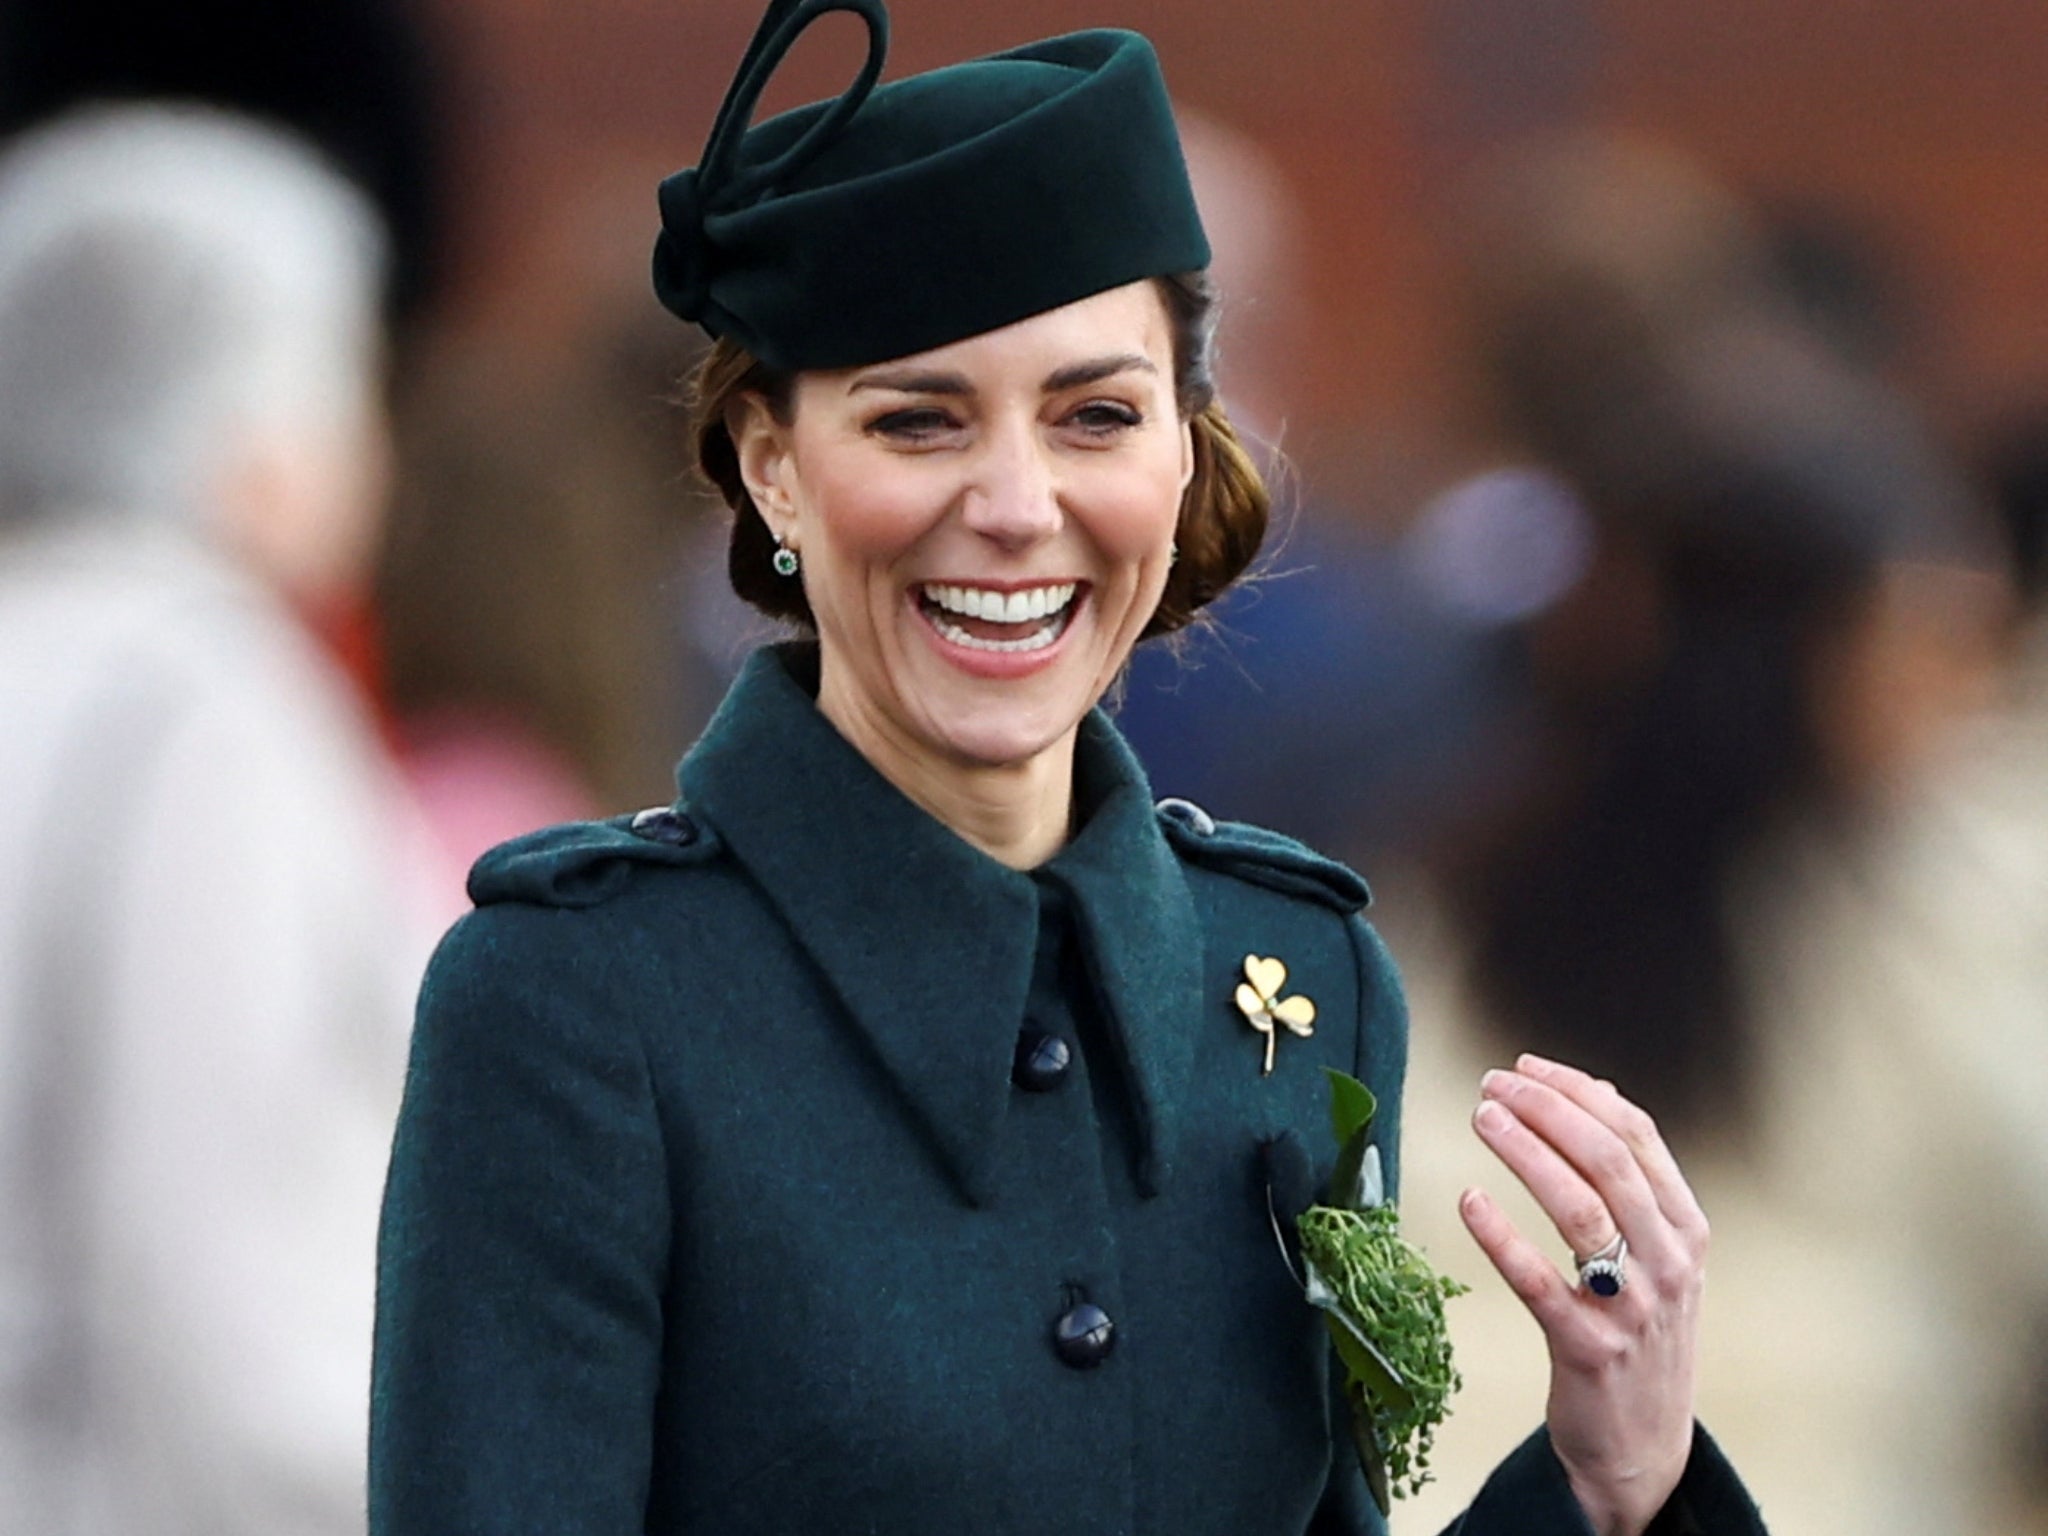 The Princess of Wales is seen during St Patrick’s Day, 2022. Kate announced the cancer diagnosis in a statement issued on Friday evening.